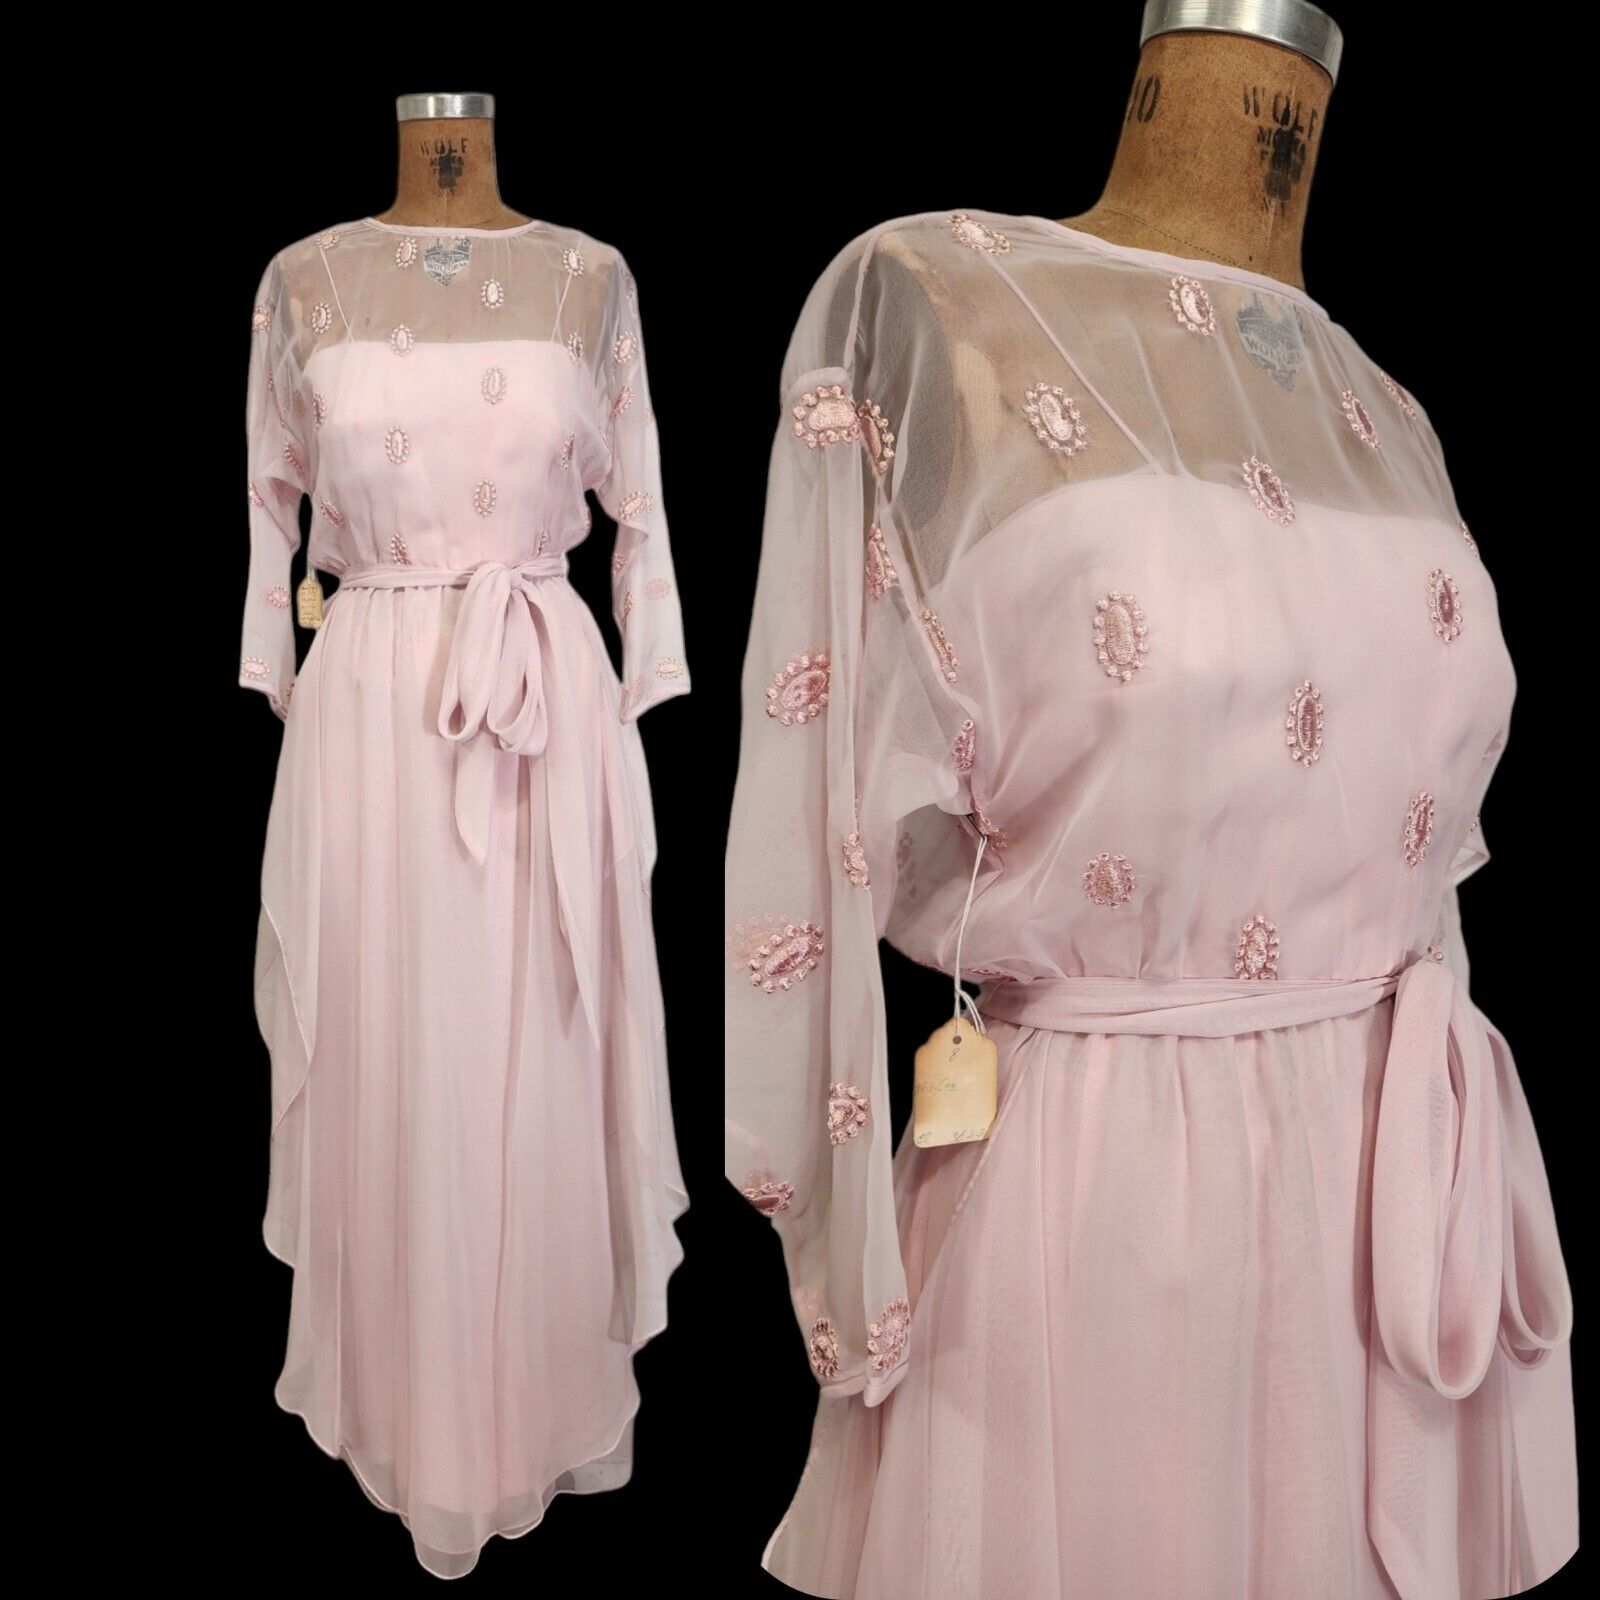 Vtg 70s 1900s Edwardian Prom Chiffon Dress Embroidery Pink Sheer Floaty Gown XS